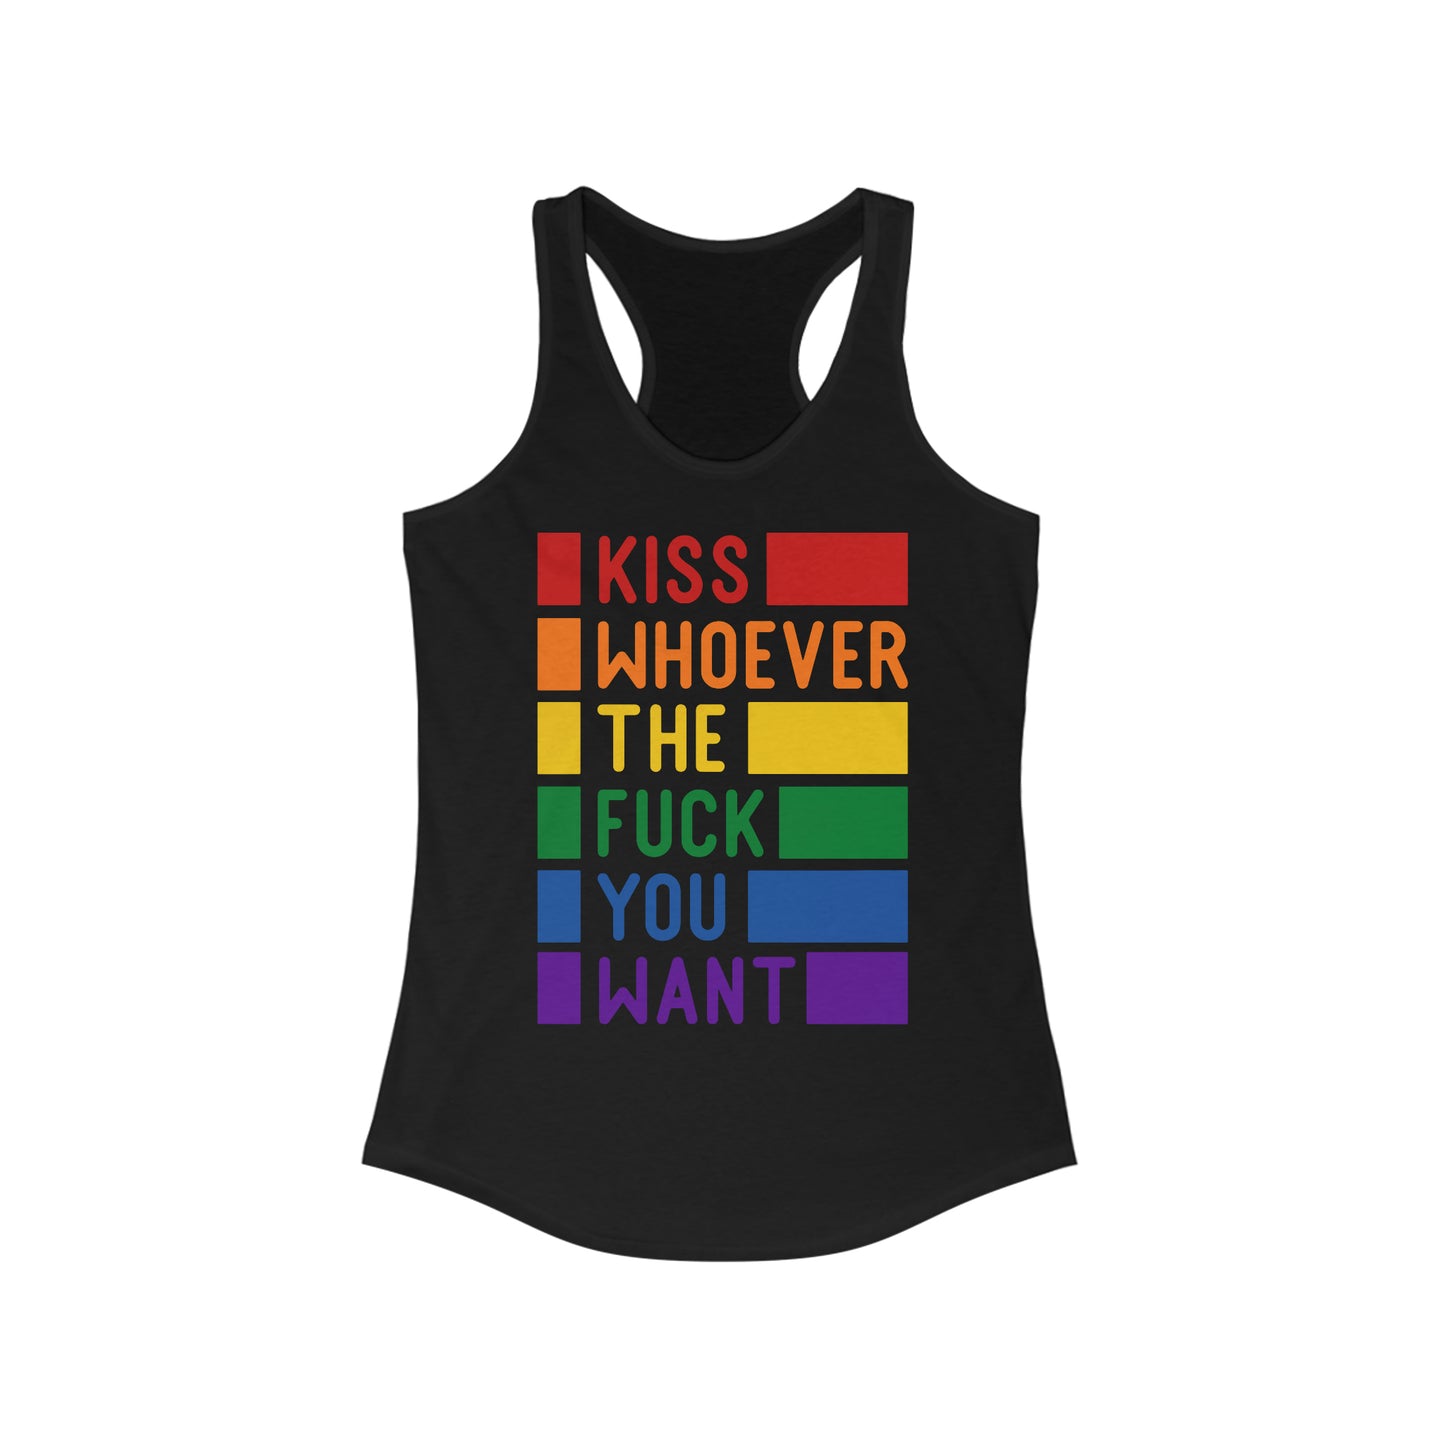 Pride: Kiss Whoever the Fuck You Want - Women's Racerback Tank